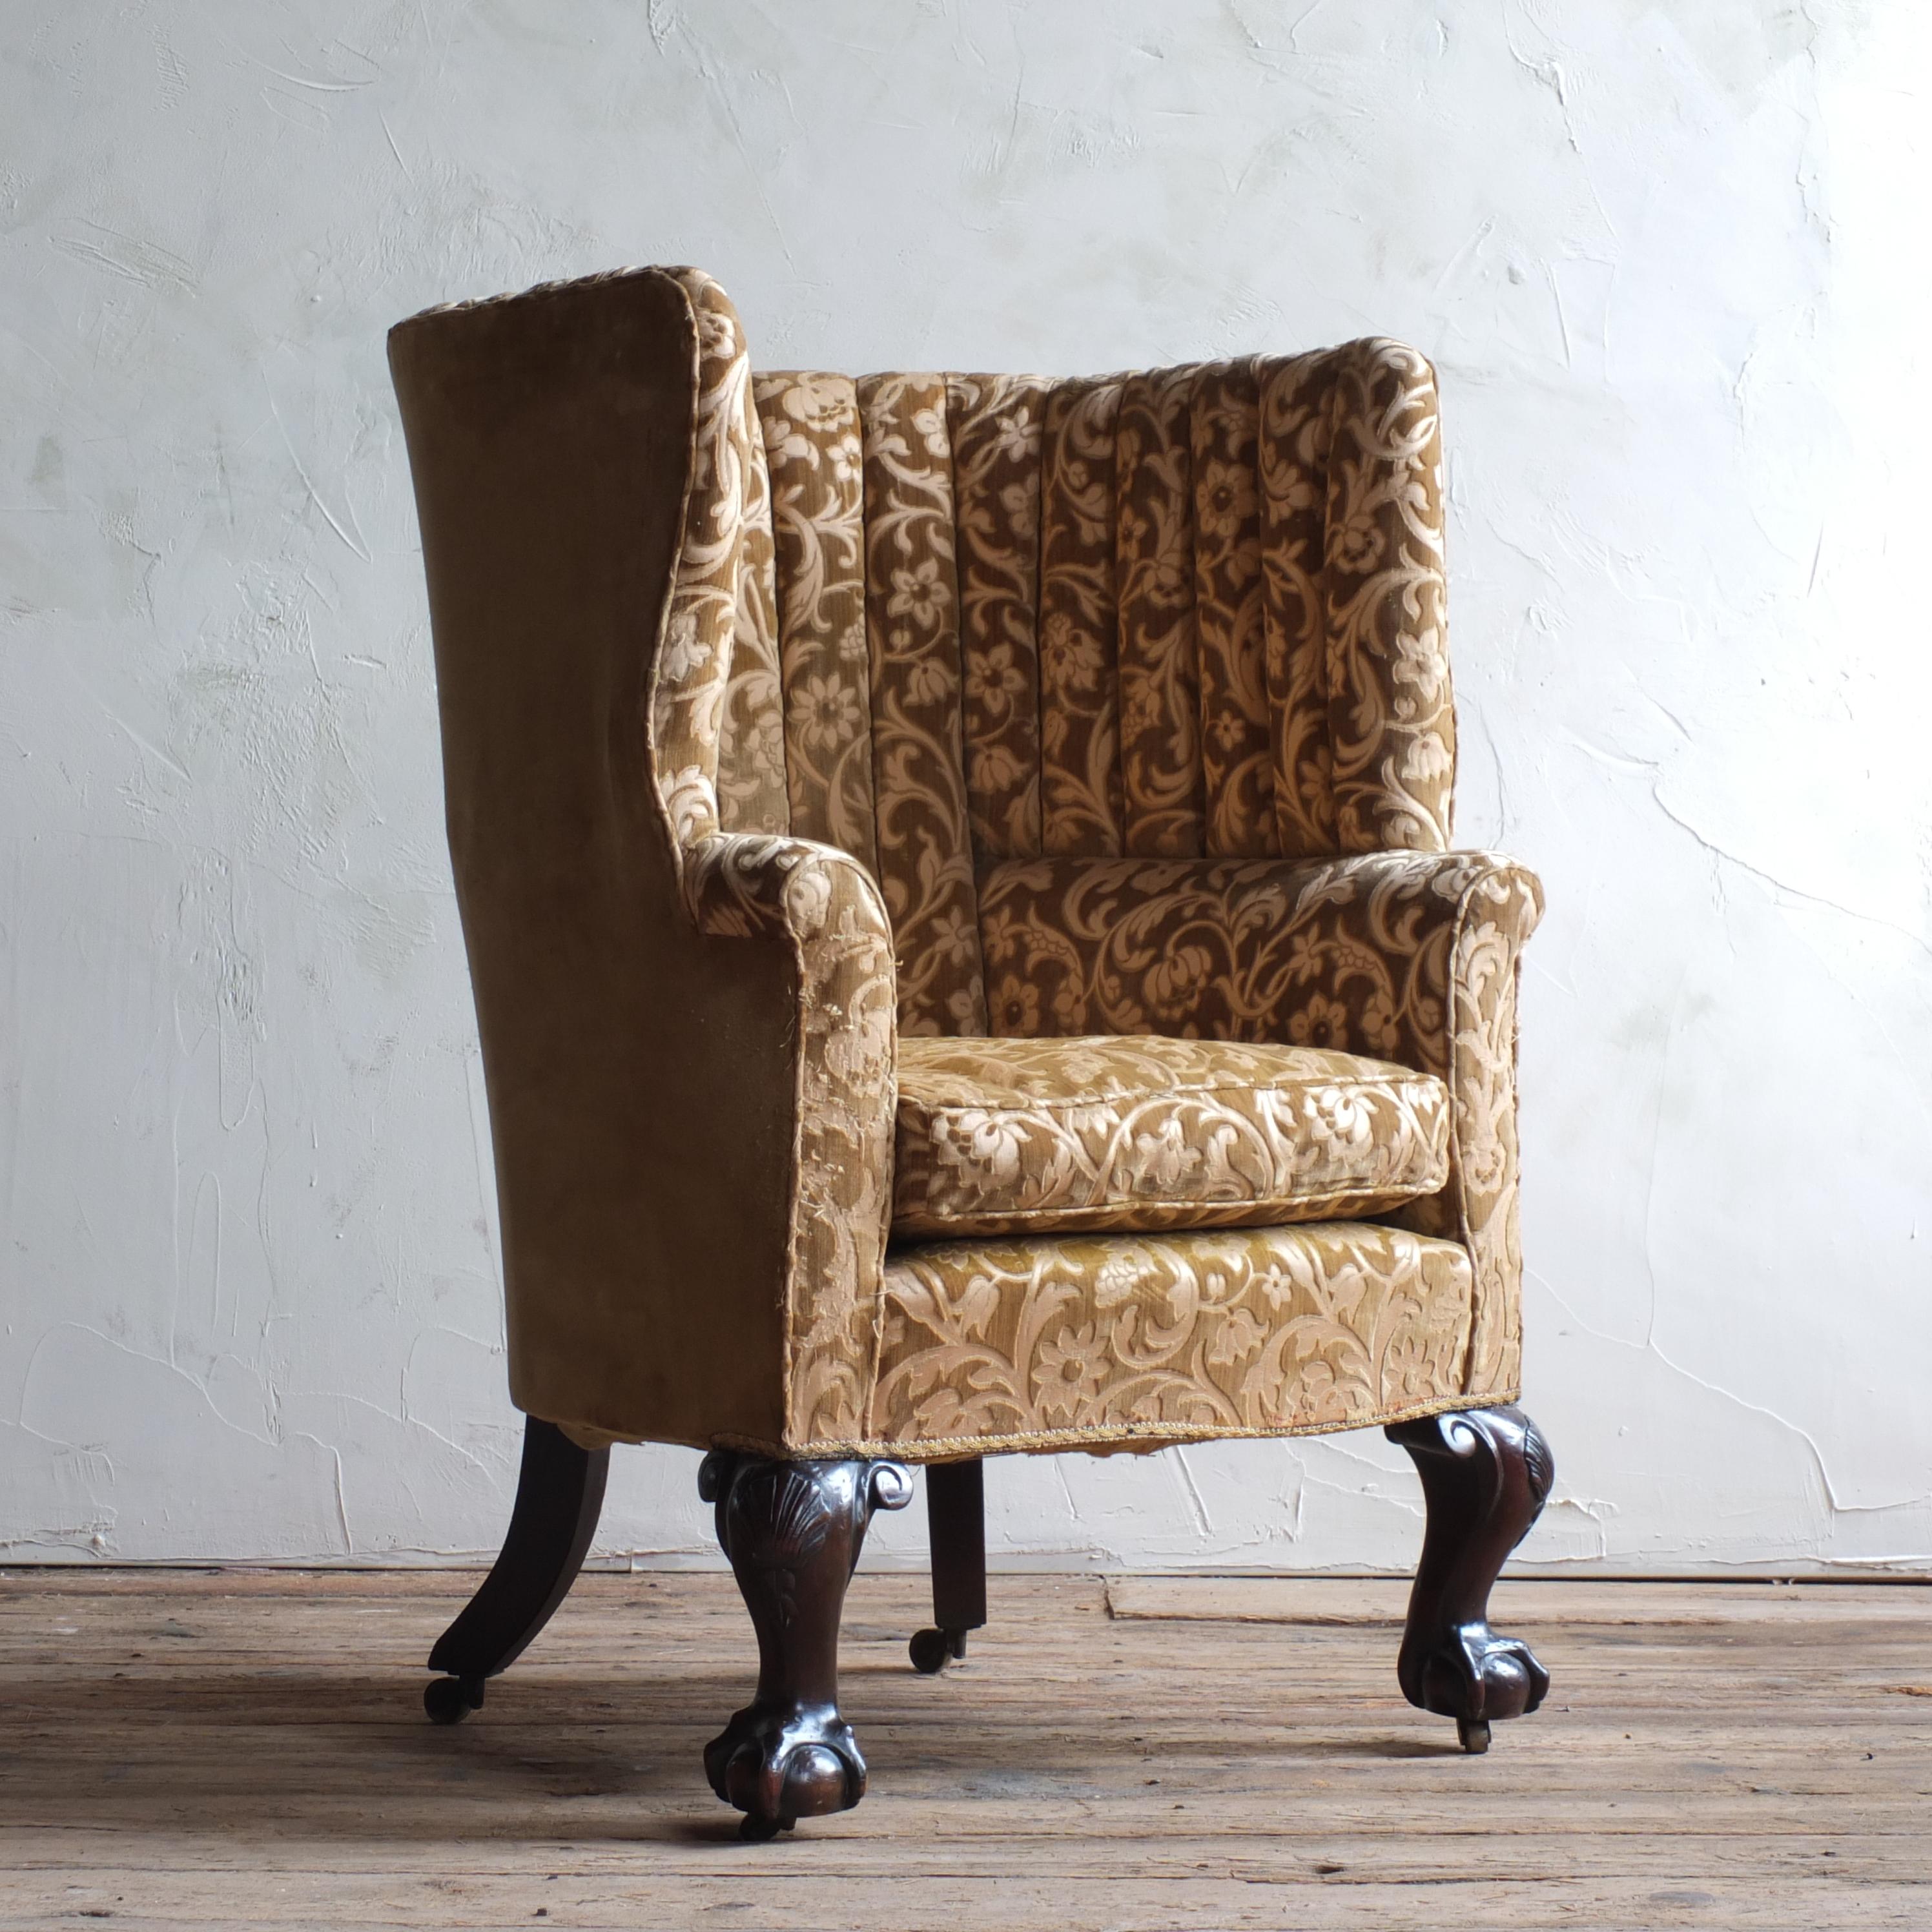 An English 19th century barrel back armchair of country house proportions. Raise on carved ball and claw mahogany legs to the front and out swept to the rear, all with brass casters.

Slight movement in the frame as can be expected with a chair of